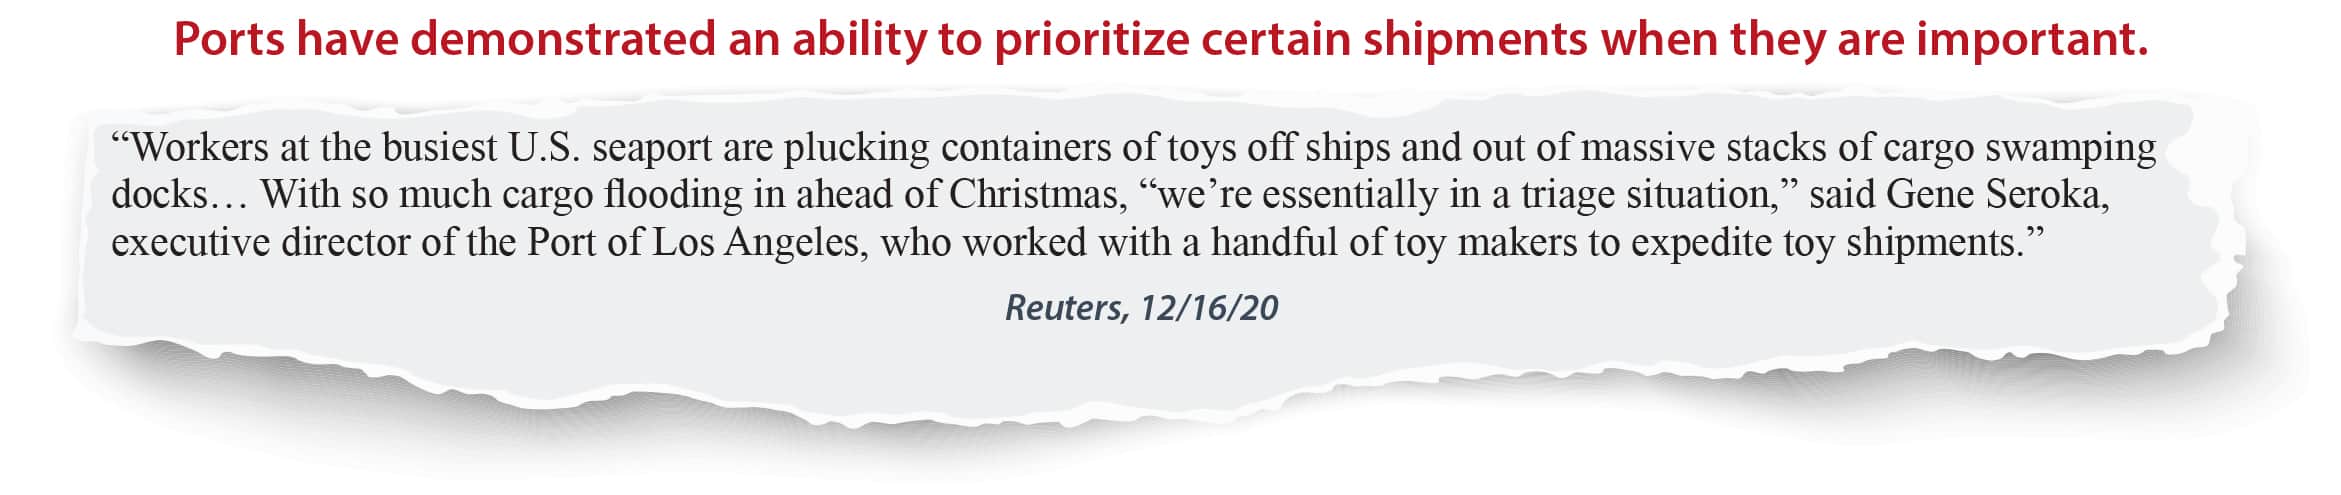 Ports have demonstrated an ability to prioritize certain shipments when they are important. Reuters quote follows - please enable images to view.